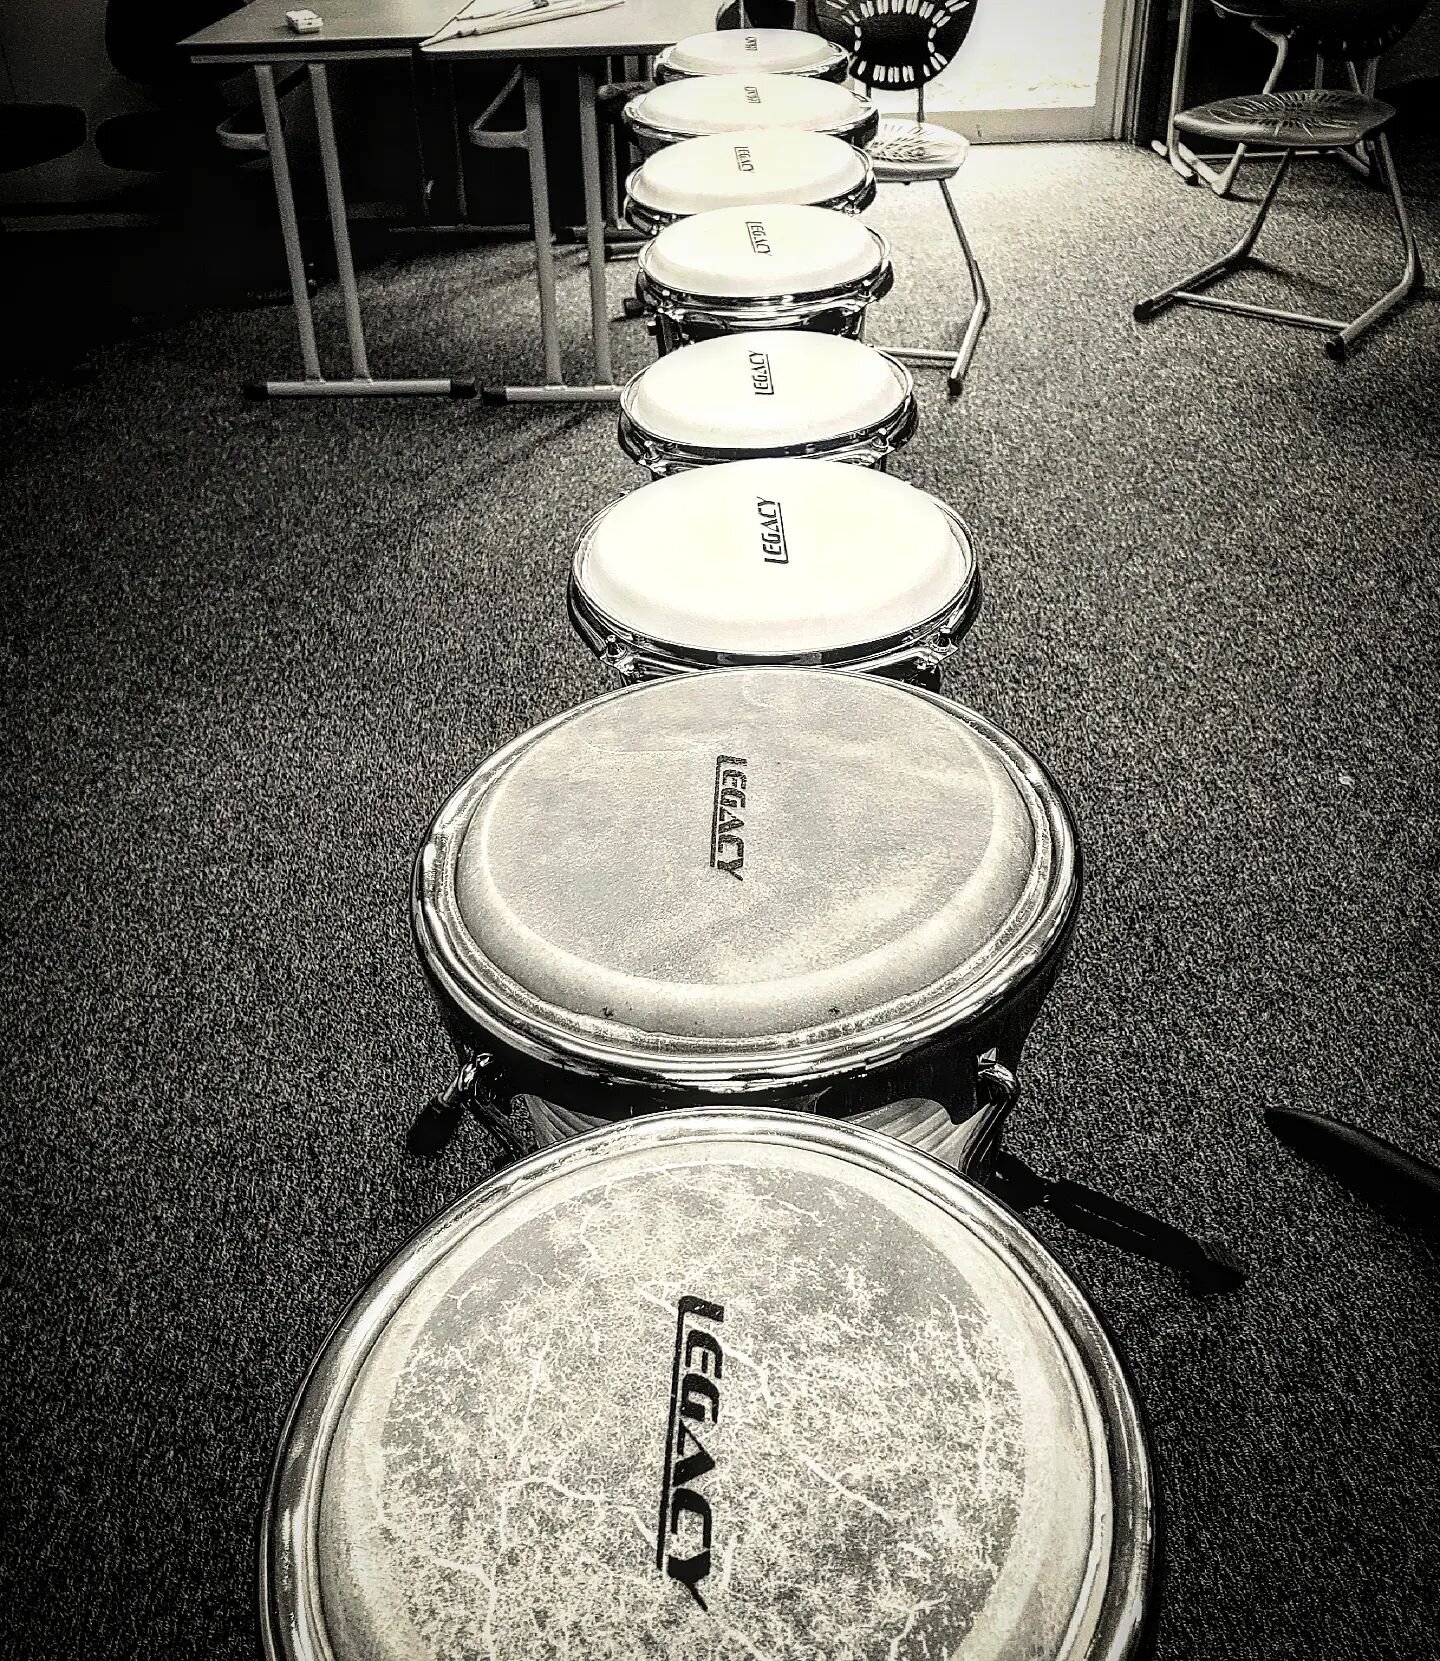 8 Bongoes in a line is the percussive &quot;Bat-Signal&quot; for Steve Reich. 

Was amazing to work with the brave, young percussionists of @waimea_college who are tackling this iconic and challenging work. Thx for having me!